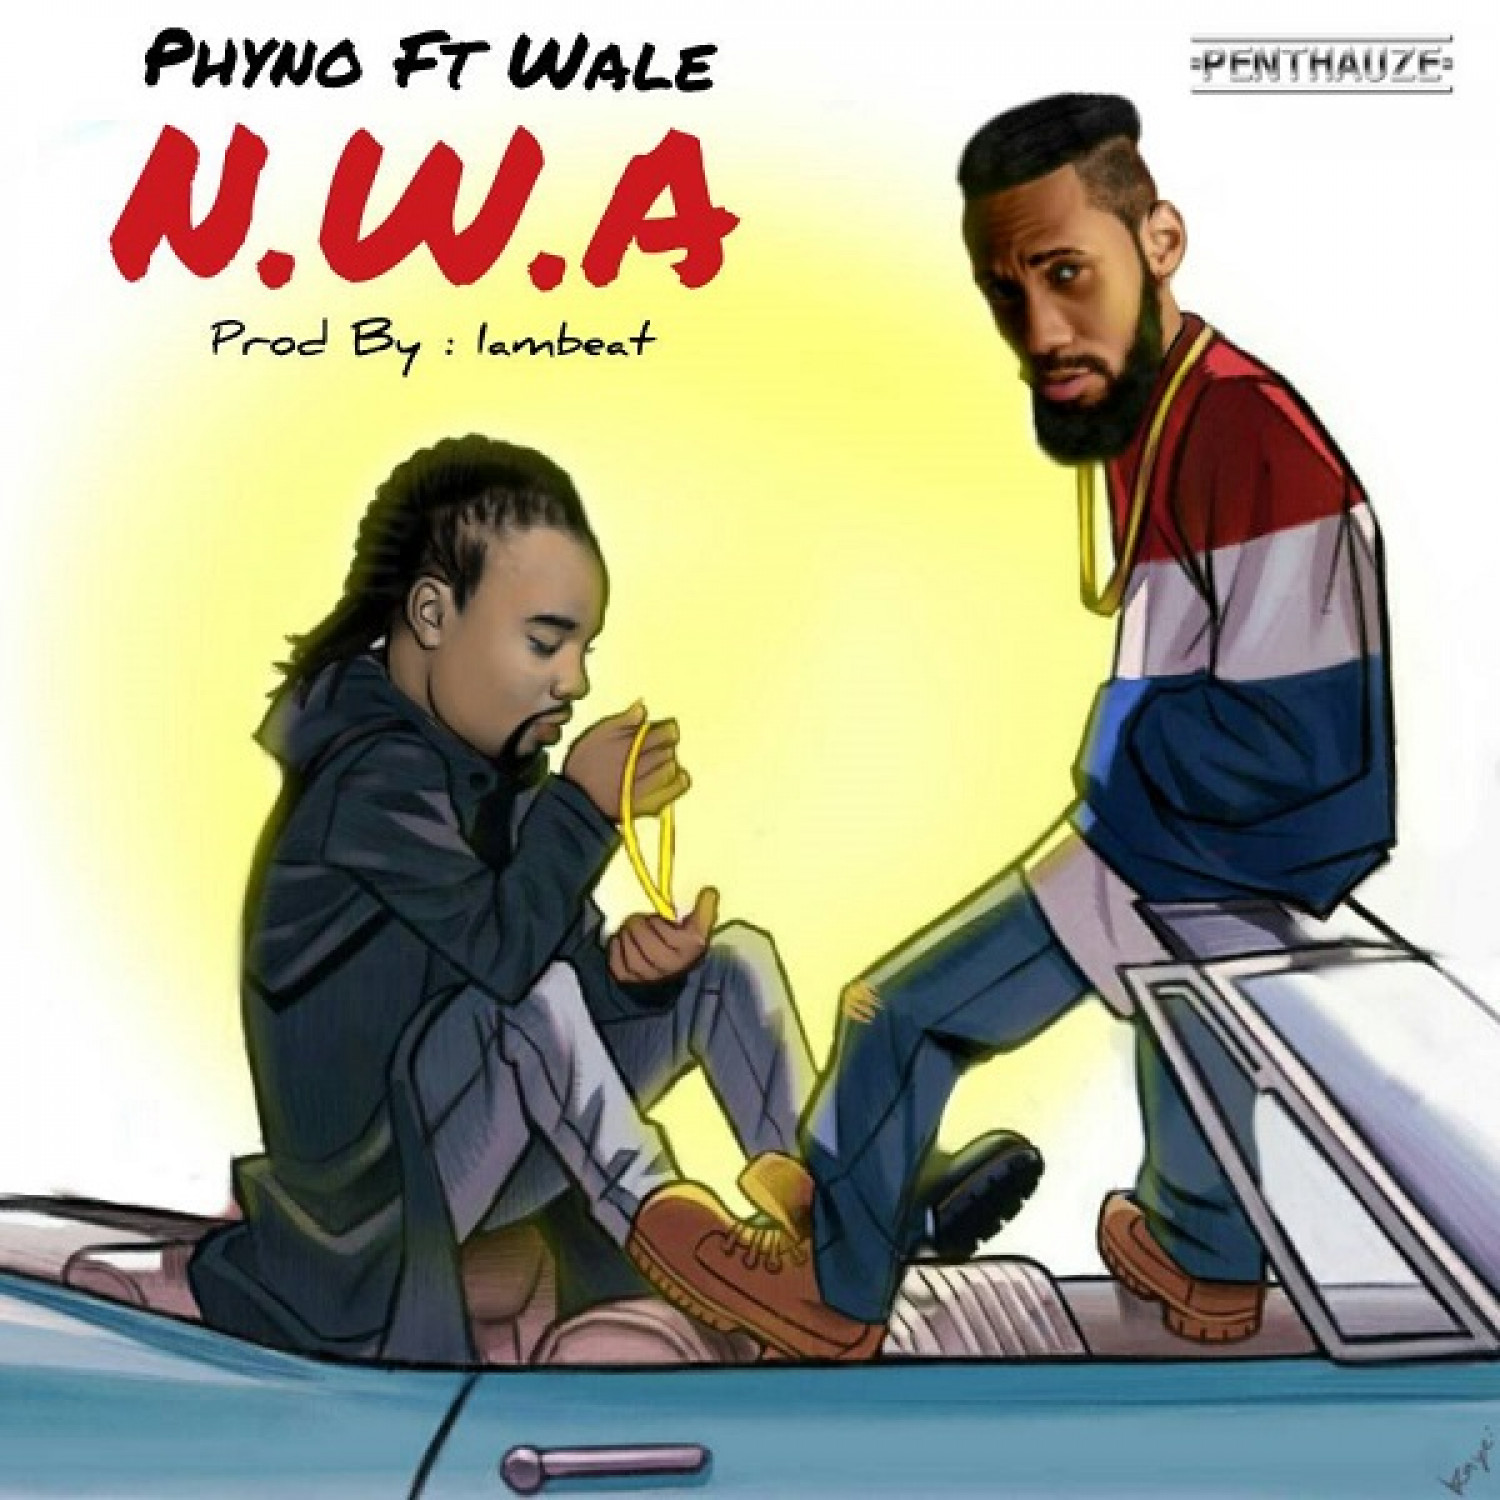 Phyno ft Wale N.W.A Infographic